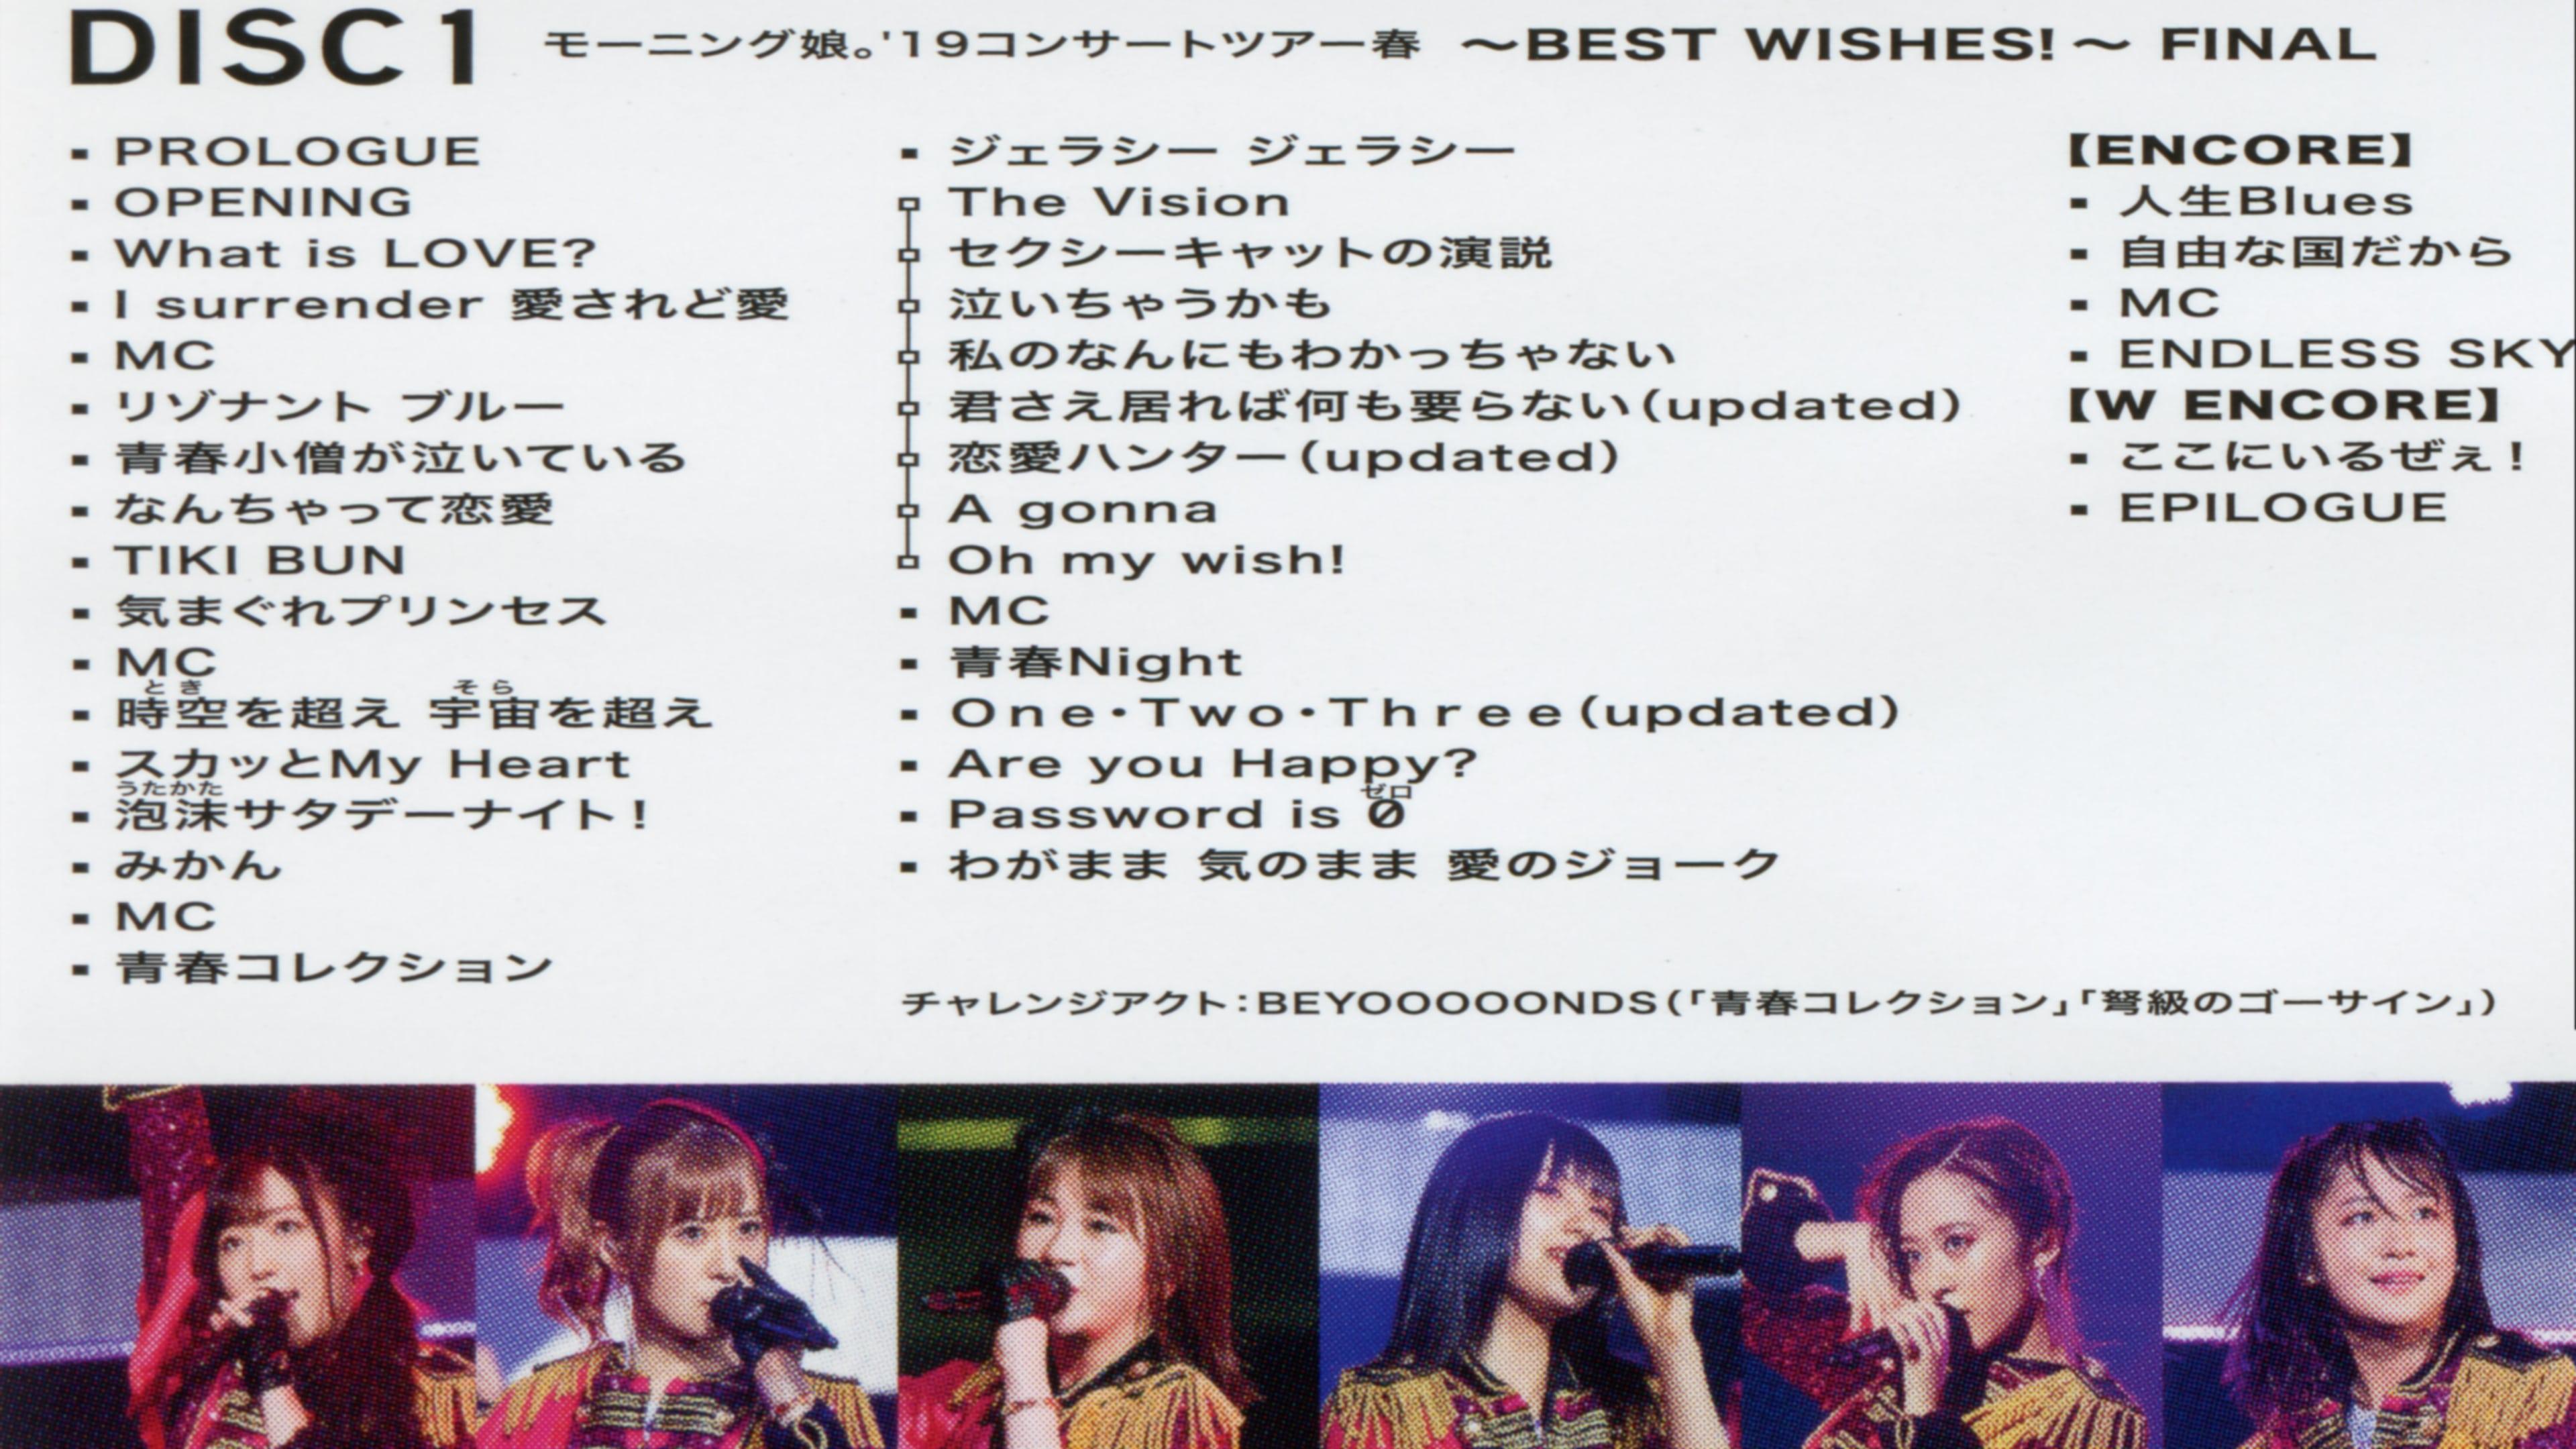 Morning Musume.'19 2019 Spring ~BEST WISHES!~ FINAL backdrop